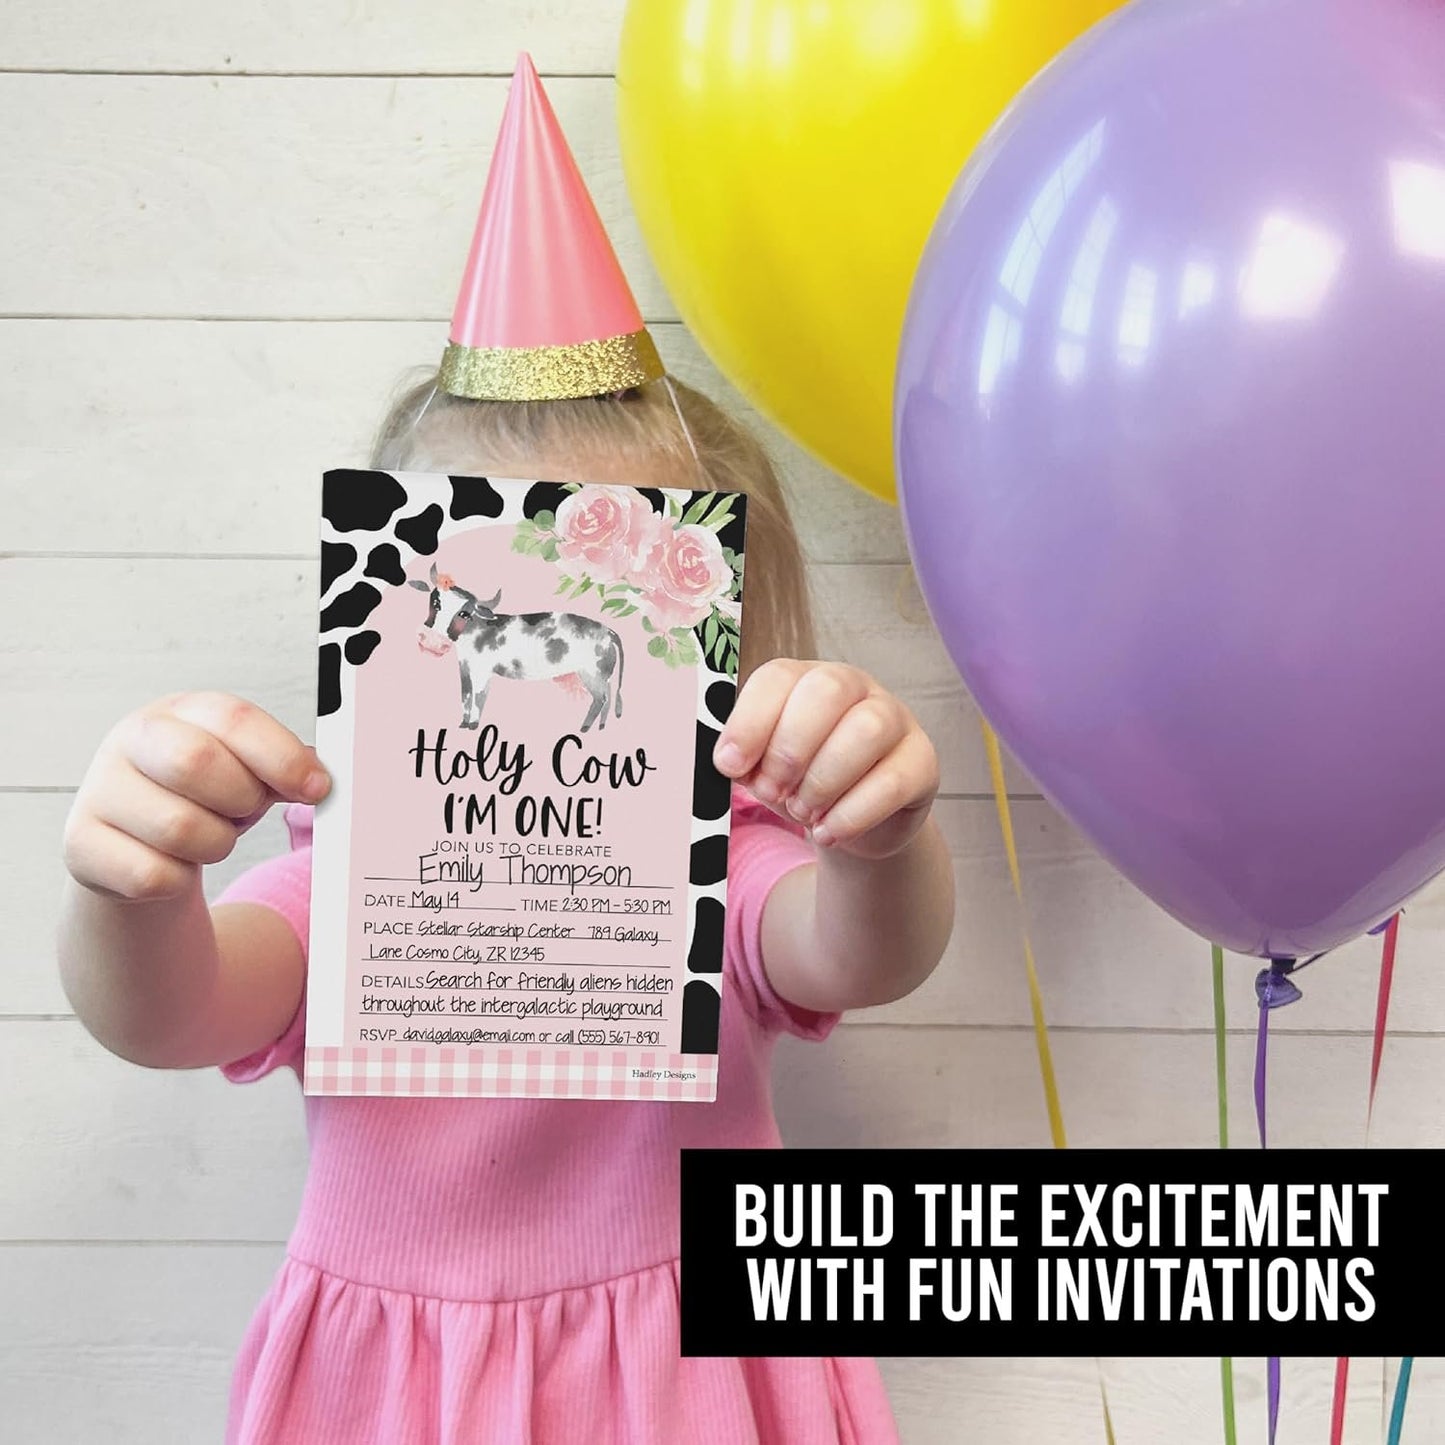 15 Holy Cow Im One Birthday Invitations Girl - Cow Birthday Party Invitations For Girls, Cow Invitations For Birthday Party Invitation Girl, Invitation Cards Birthday, Kids Birthday Invitations Girl